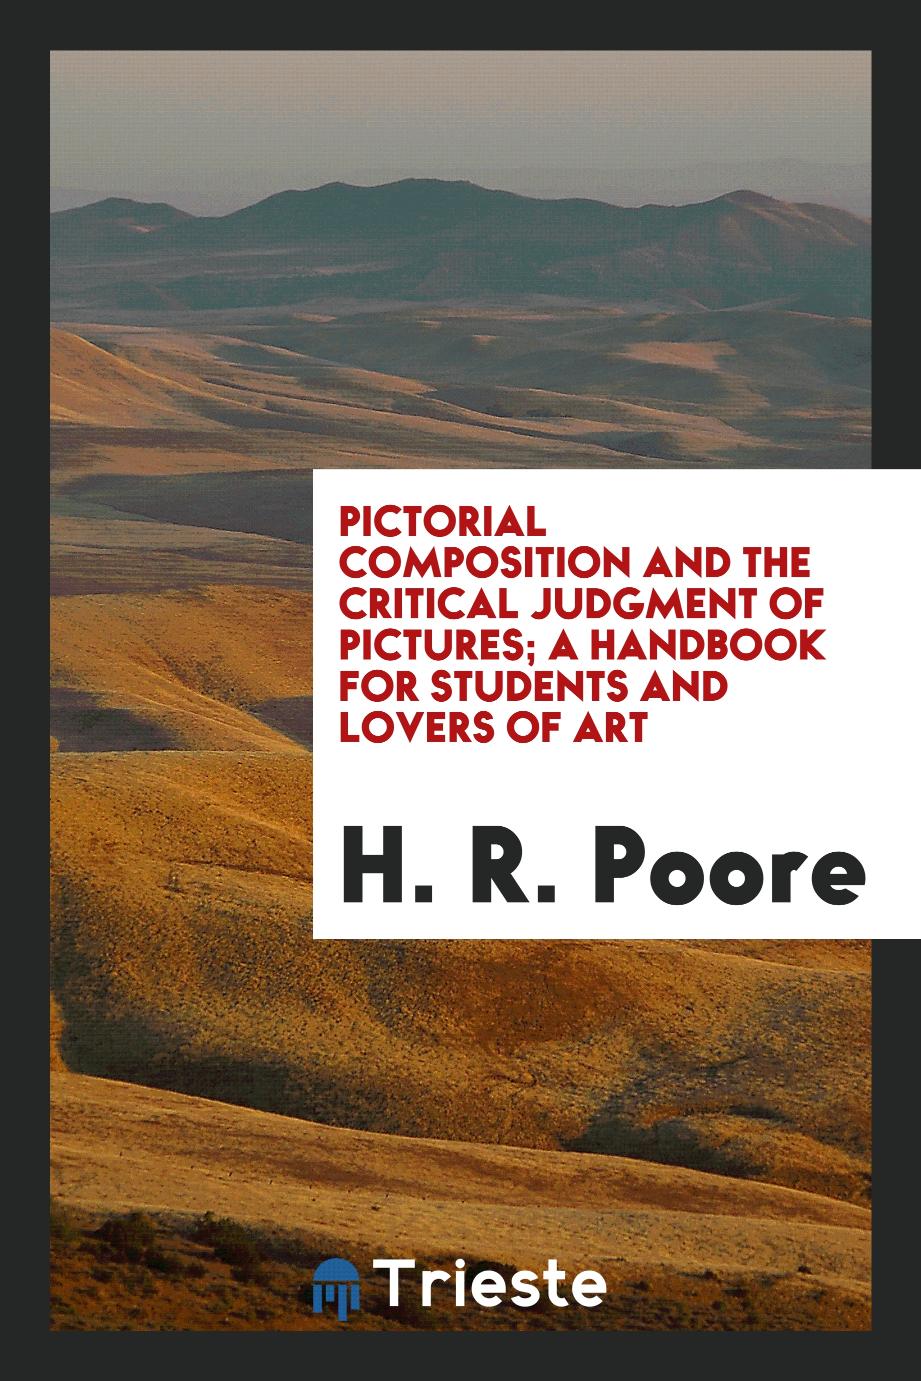 Pictorial composition and the critical judgment of pictures; a handbook for students and lovers of art